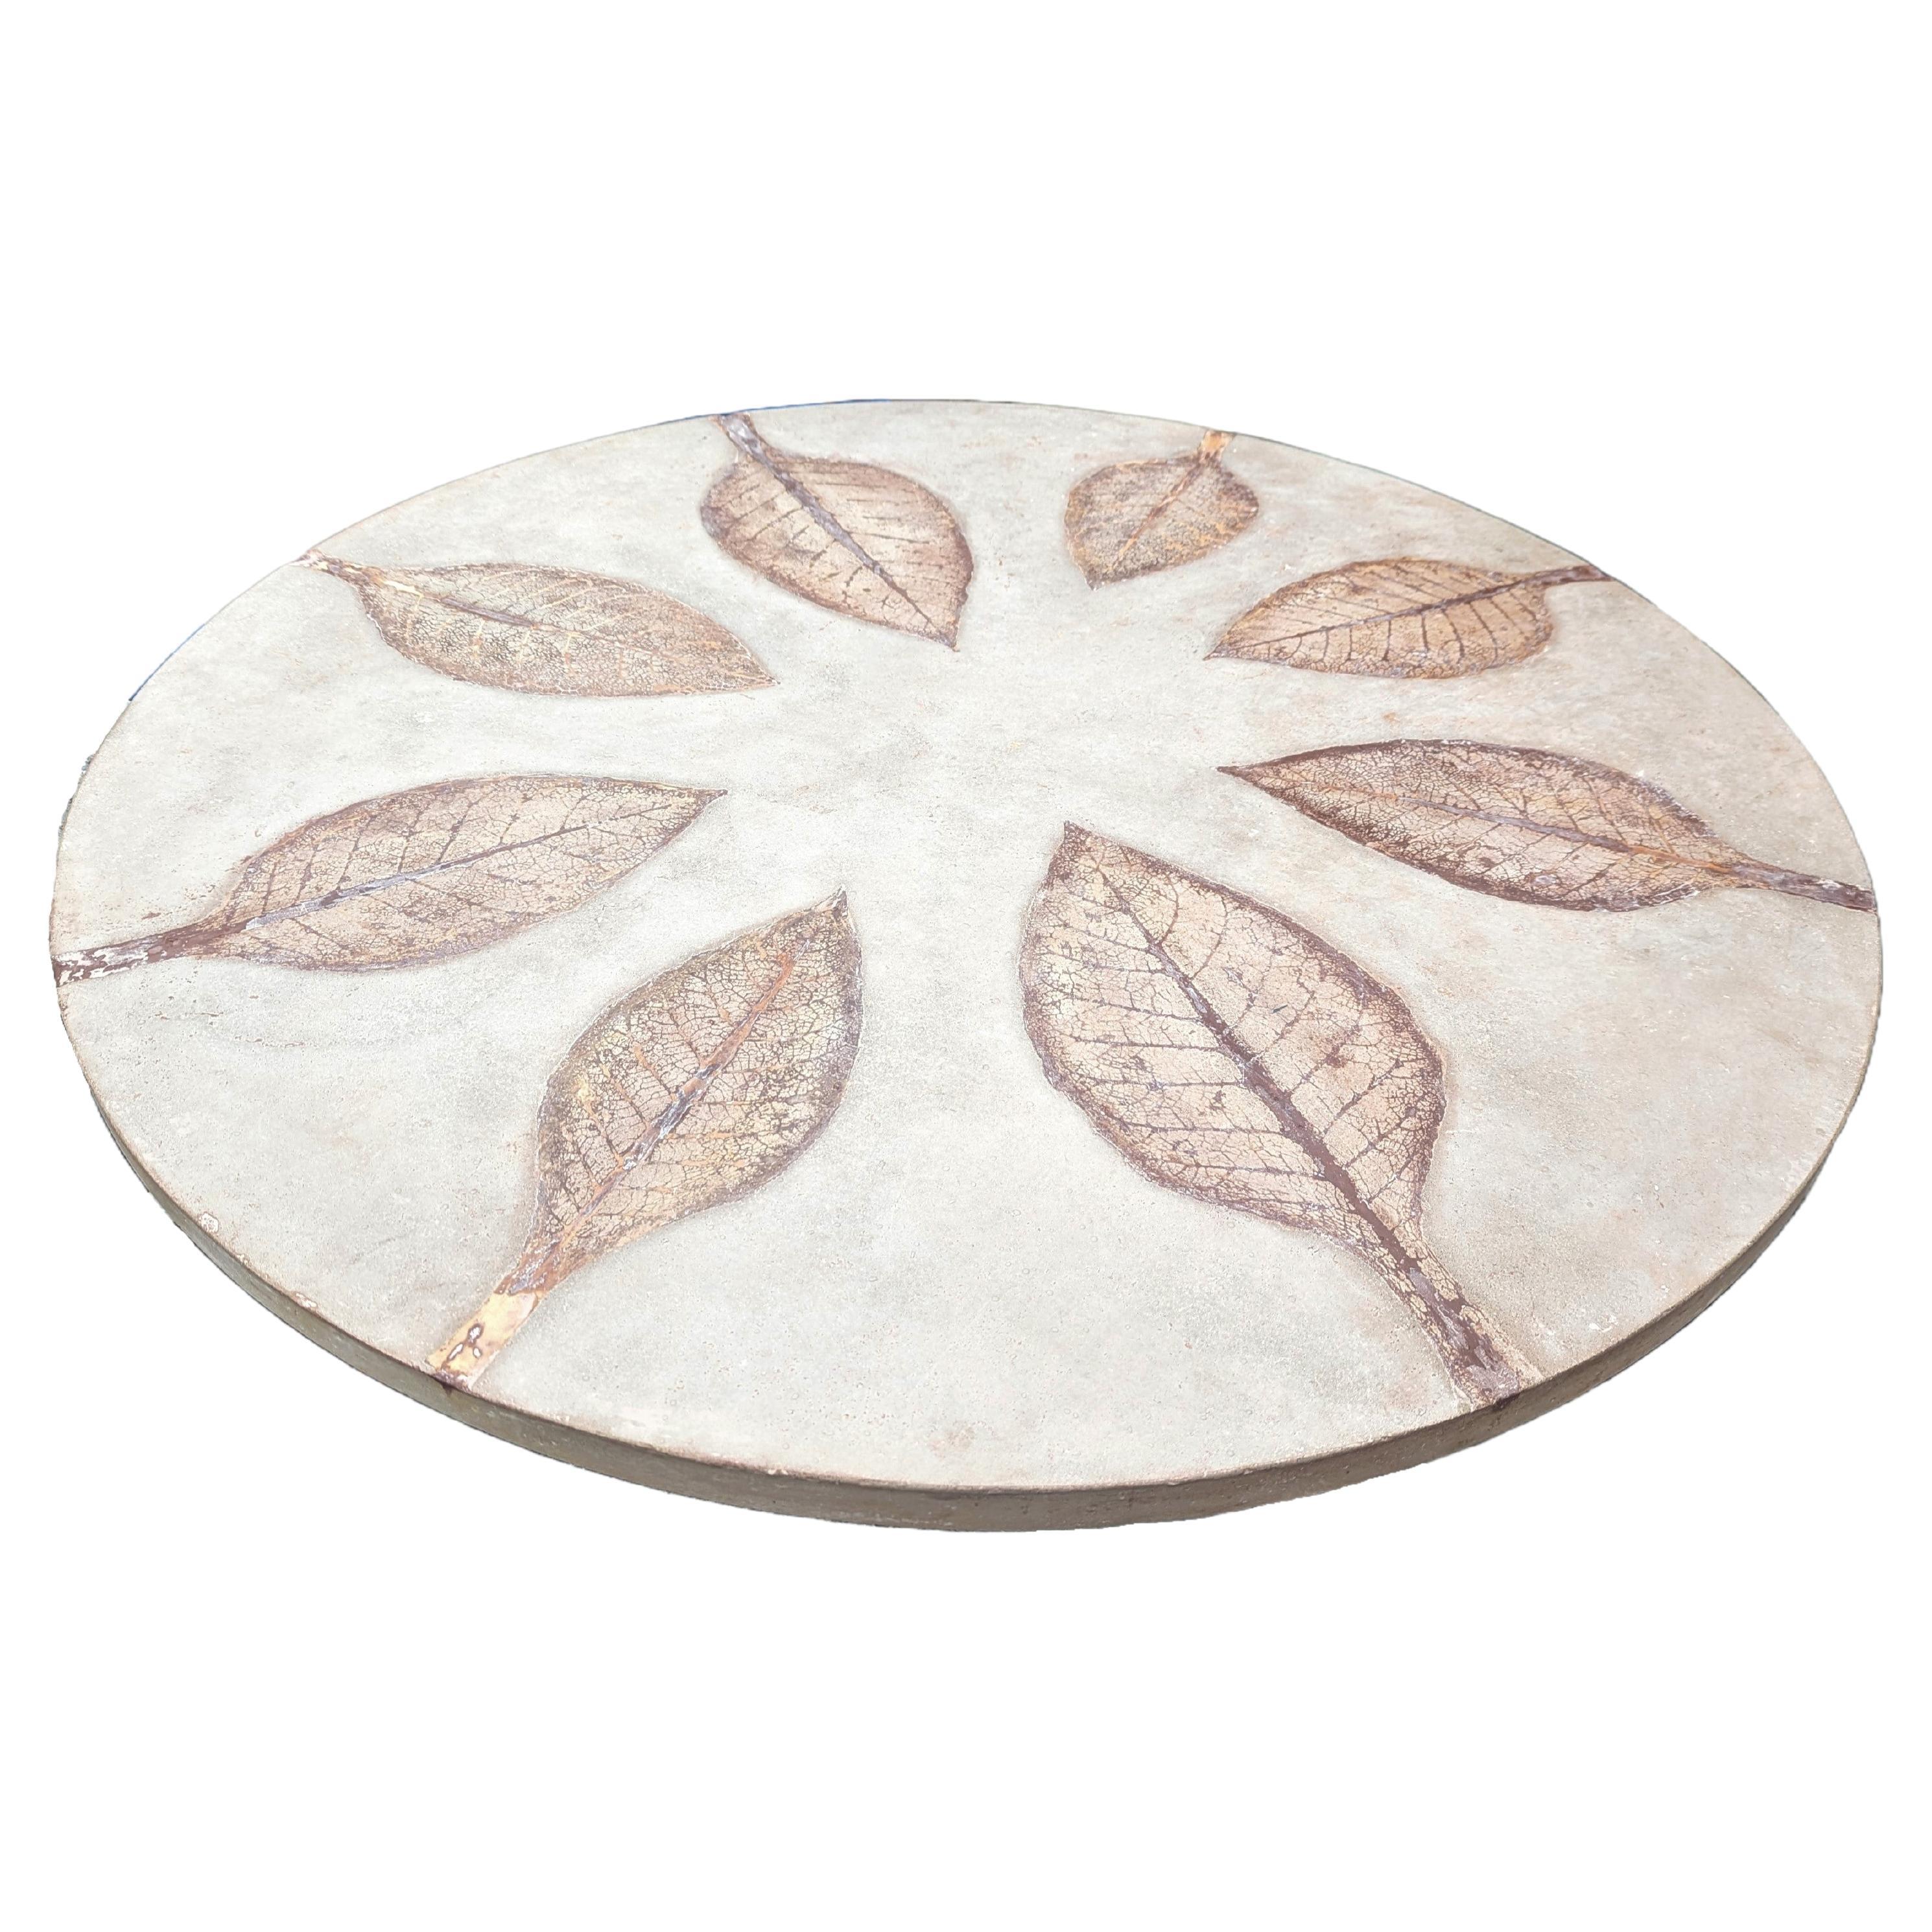 Customizable Concrete Dining or Coffee Table Tops with Botanical Designs For Sale